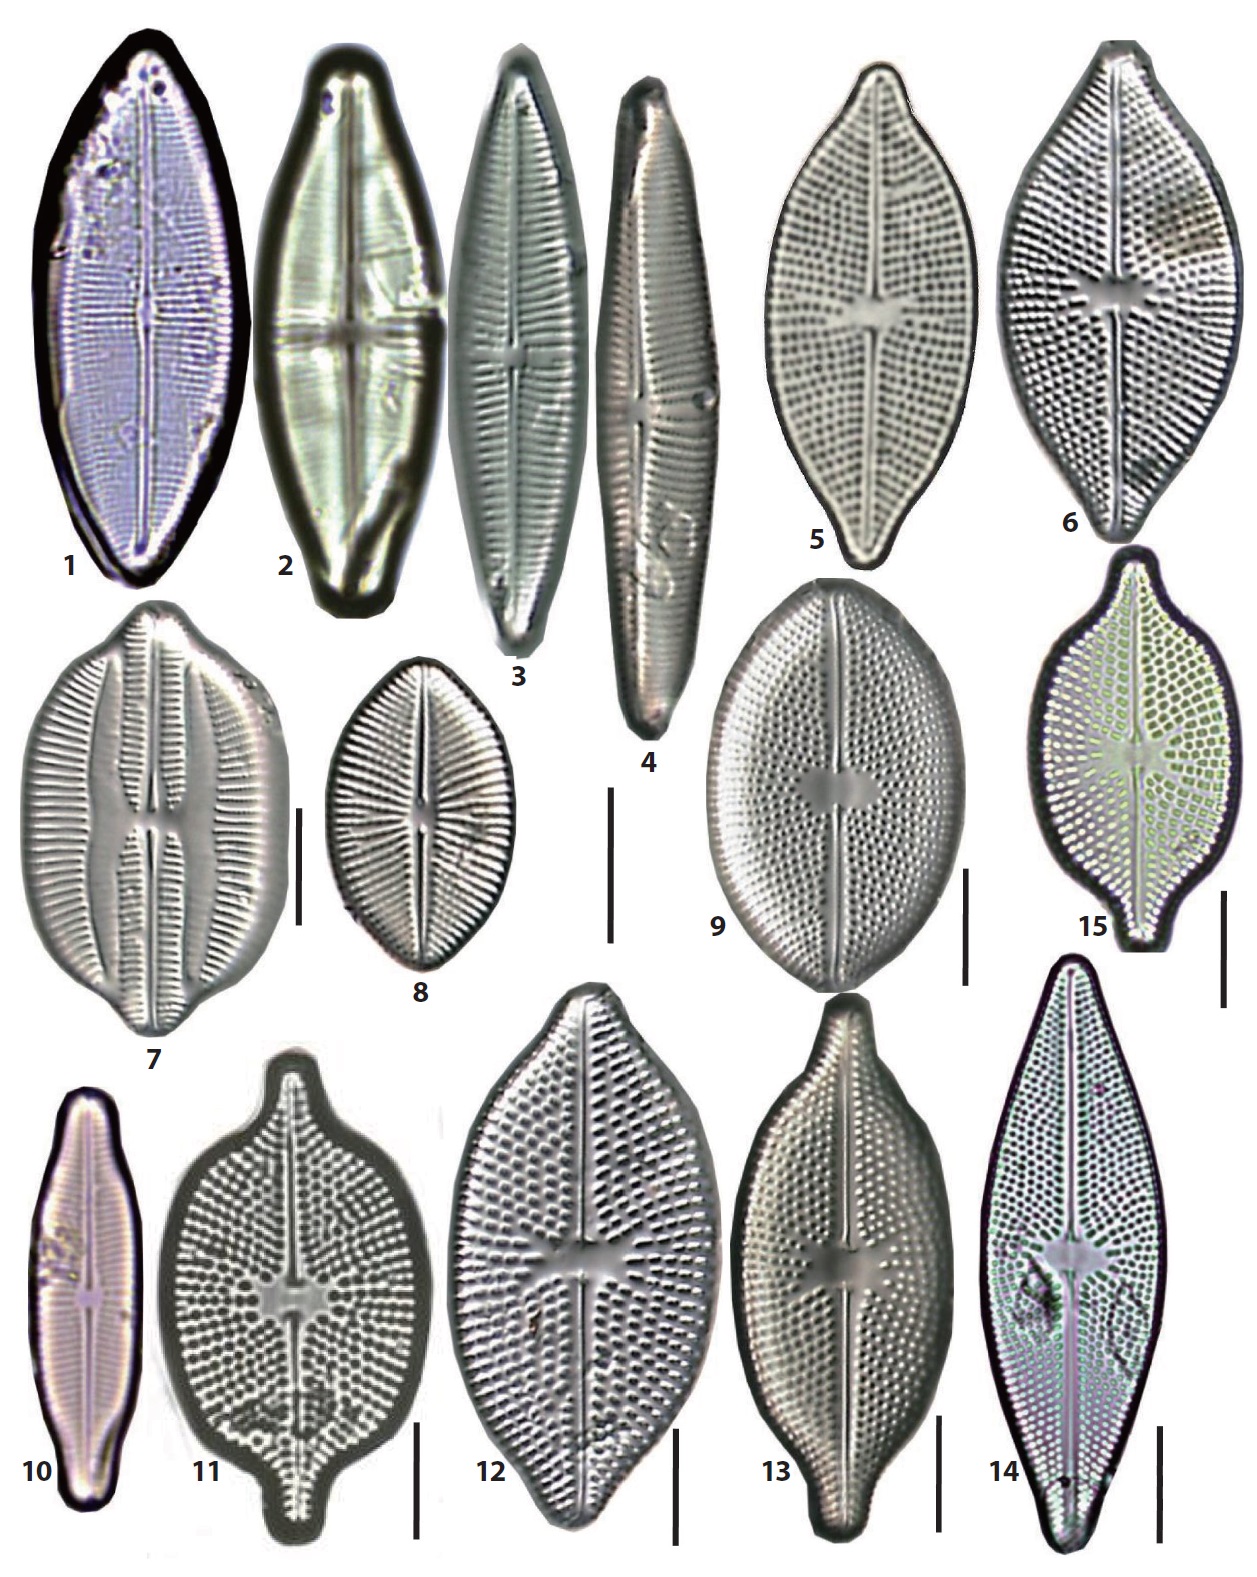 Fig. 1. Parlibellus delognei. Fig. 2. P. crucicula. Figs. 3, 4. P. ceuciculoides. Figs. 5, 6. Moreneis coreana. Fig. 7. Lyrella clavata (x1500). Fig. 8.
Cosmioneis eta. Fig. 9. Petroneis marina (x1500). Fig. 10. Parlibellus protracta. Fig. 12. Navicula alpha (x1500). Figs. 11, 13？15. Different forms with the
typical N. alpha (x1500). Scale bars, 10 μm.